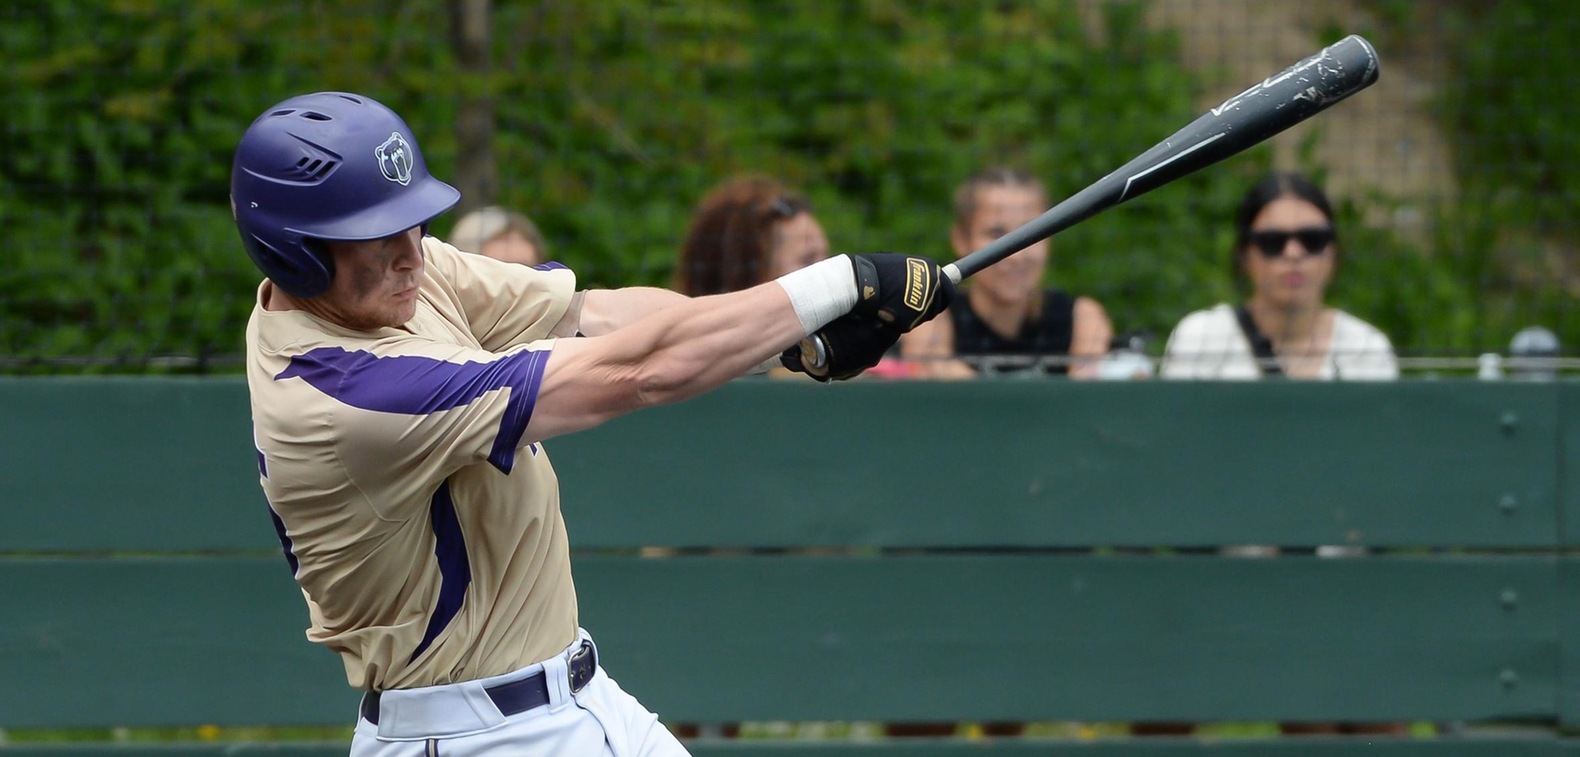 Riley Baasch notched his milestone 200th RBI in Monday's first championship game.